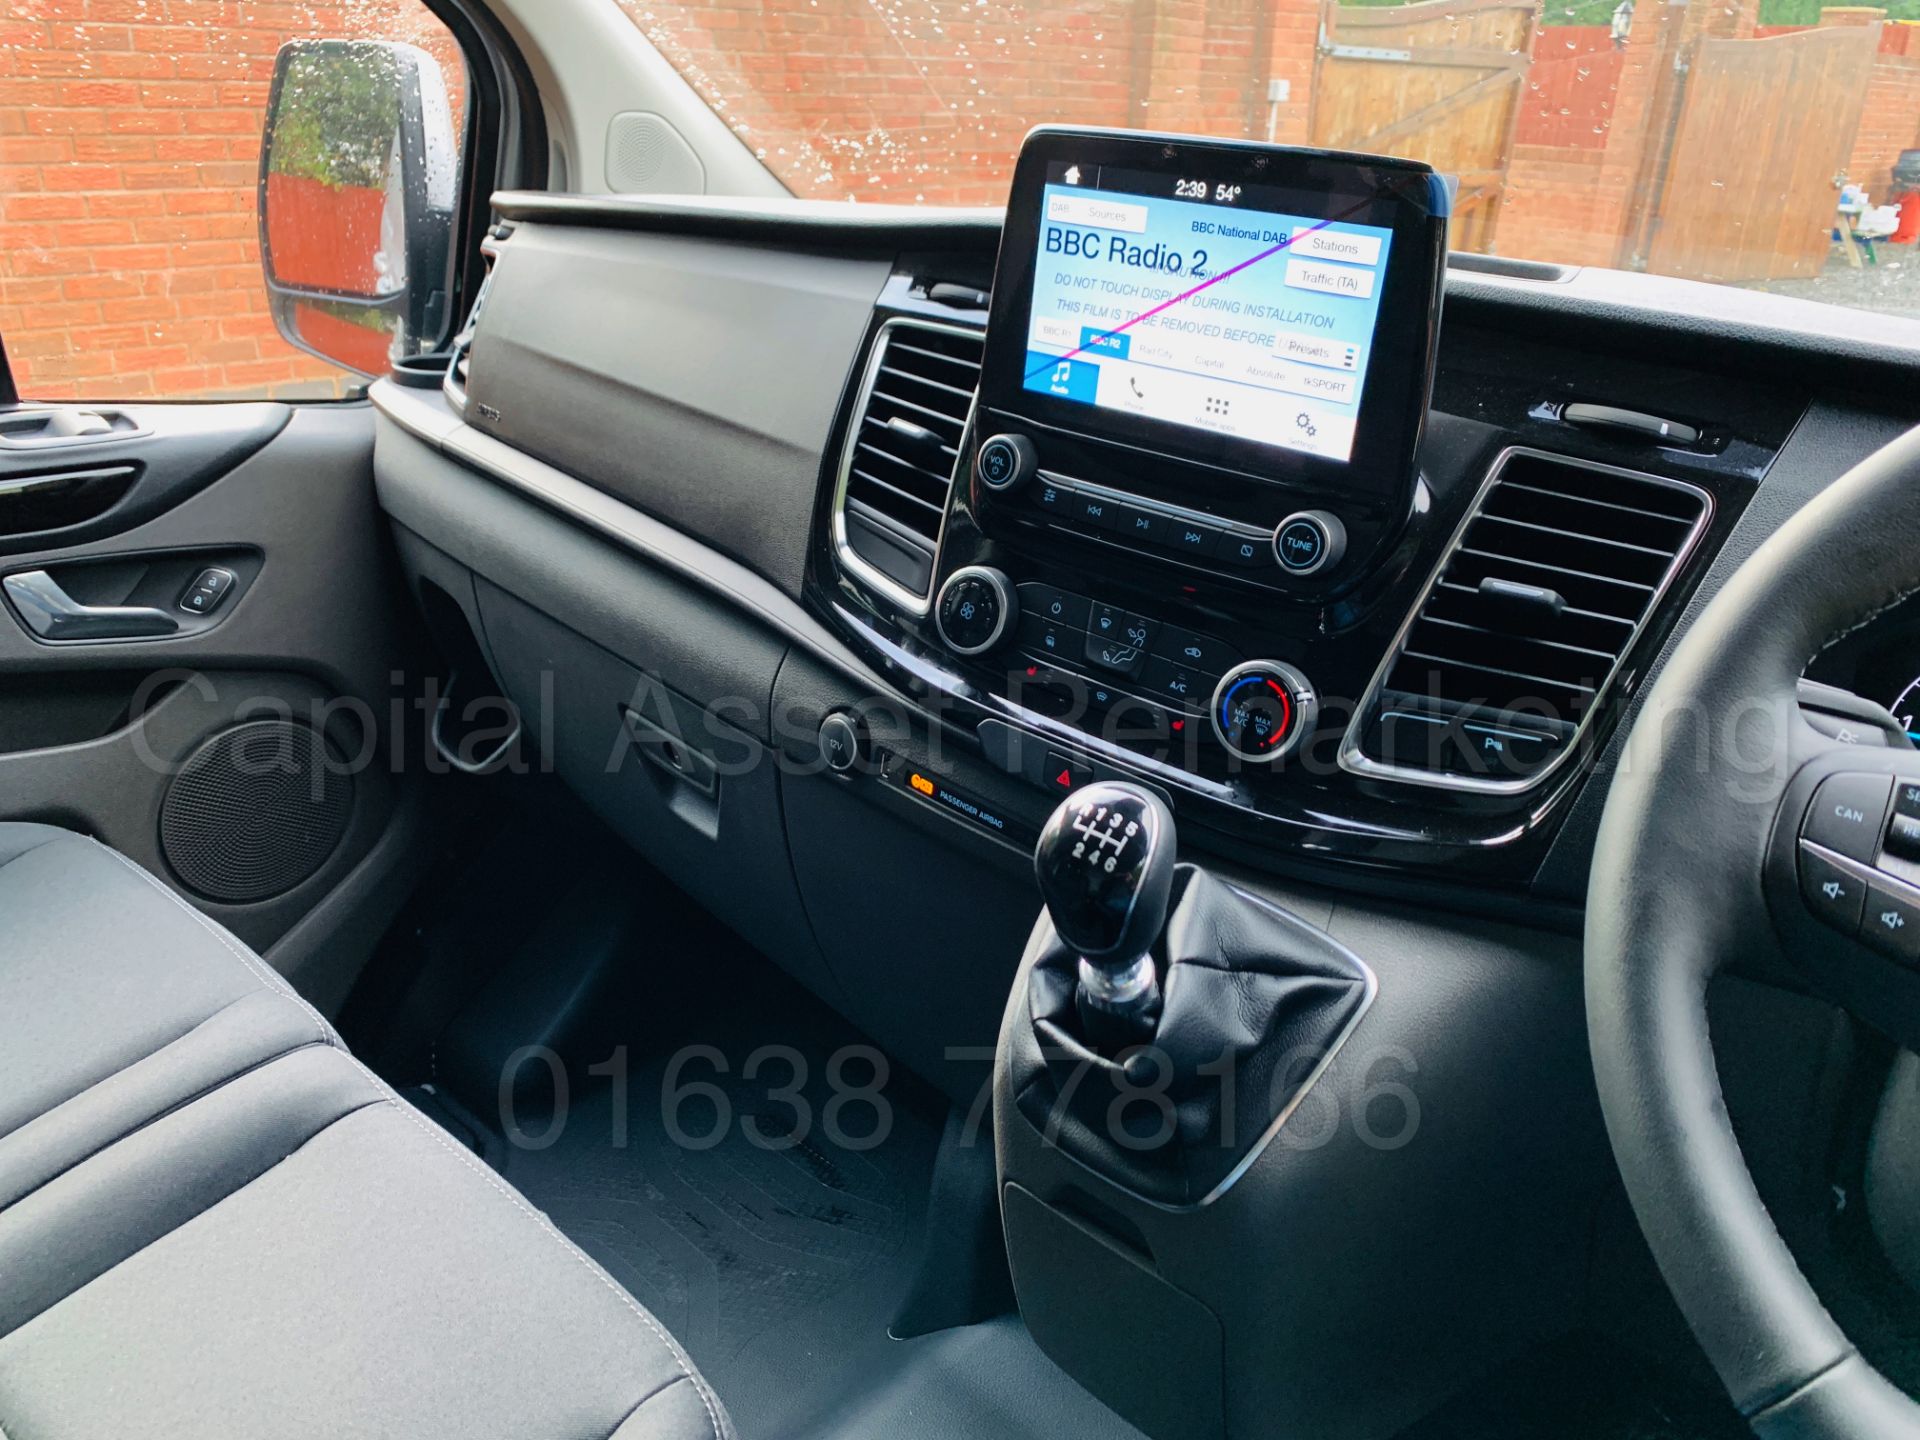 FORD TRANSIT CUSTOM *LIMITED EDTION* (2018 - 68 REG) '2.0 TDCI - 130 BHP - 6 SPEED' *ALL NEW MODEL* - Image 42 of 51